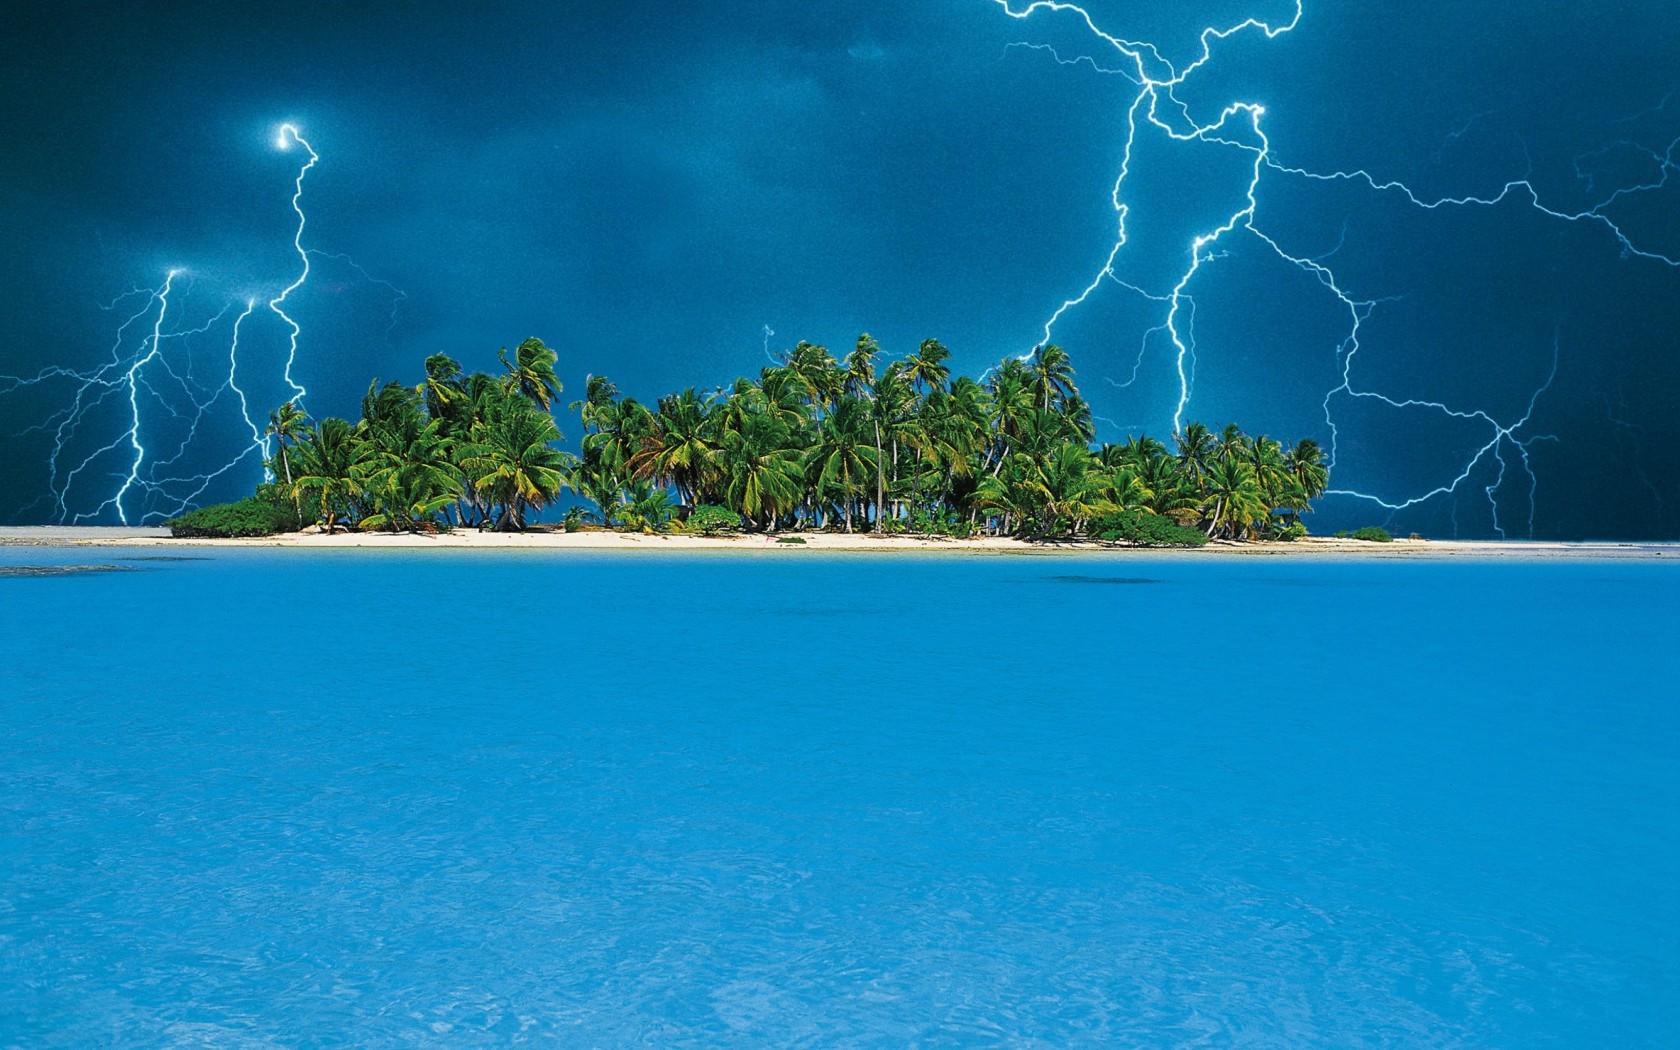 wallpapers wallpaper 17755 nature lightning storm over tropical island 1680x1050